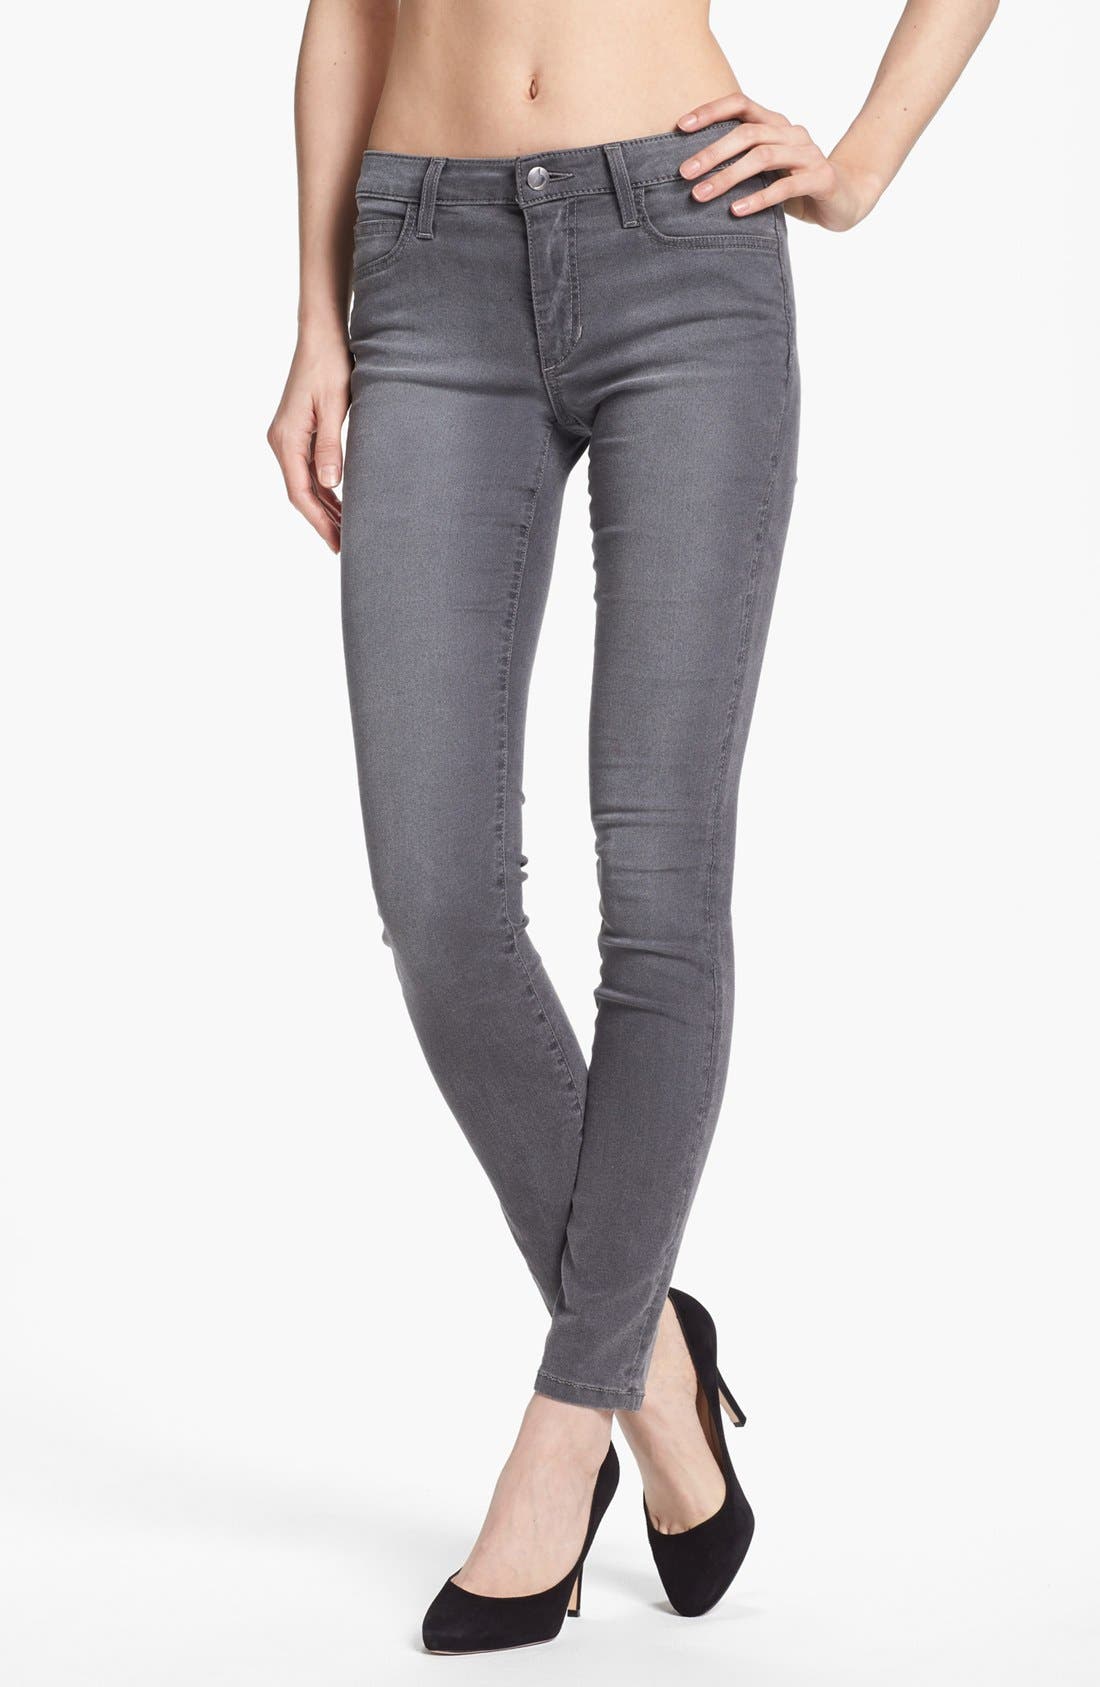 grey ankle jeans